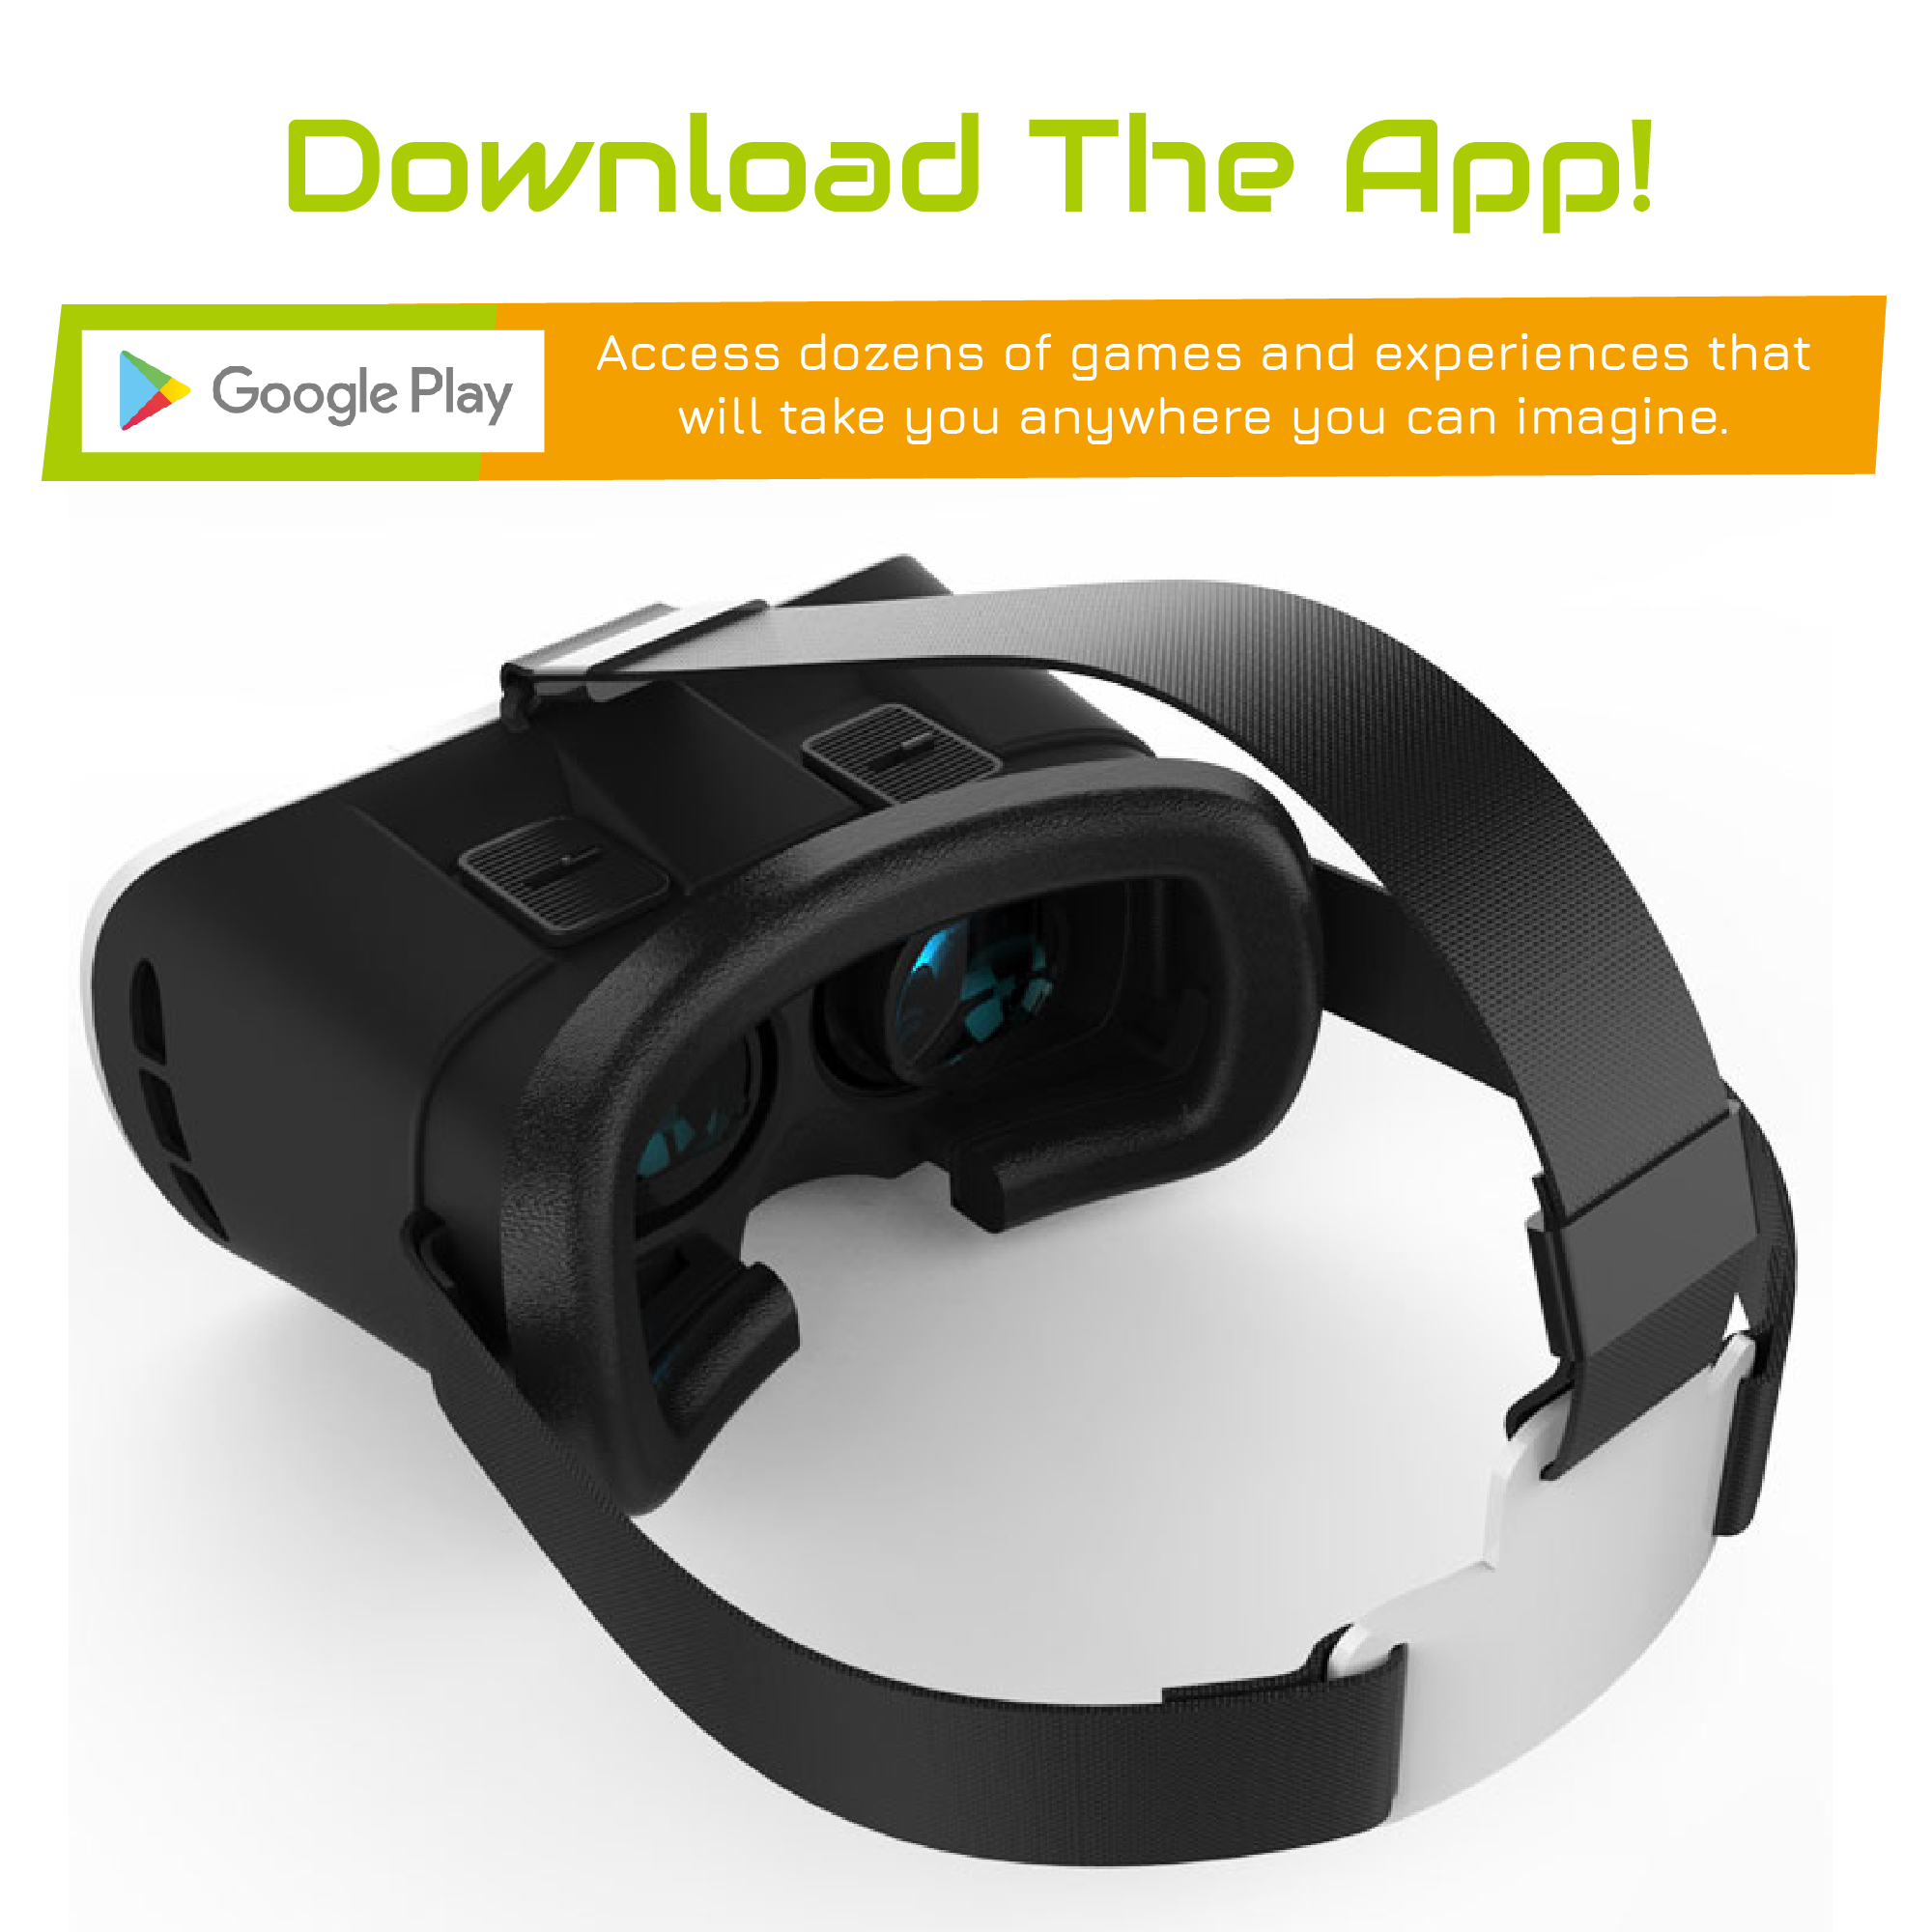 PBS Retro Space-Themed Virtual Reality Headset for Android and iPhone (White)- New - image 3 of 8